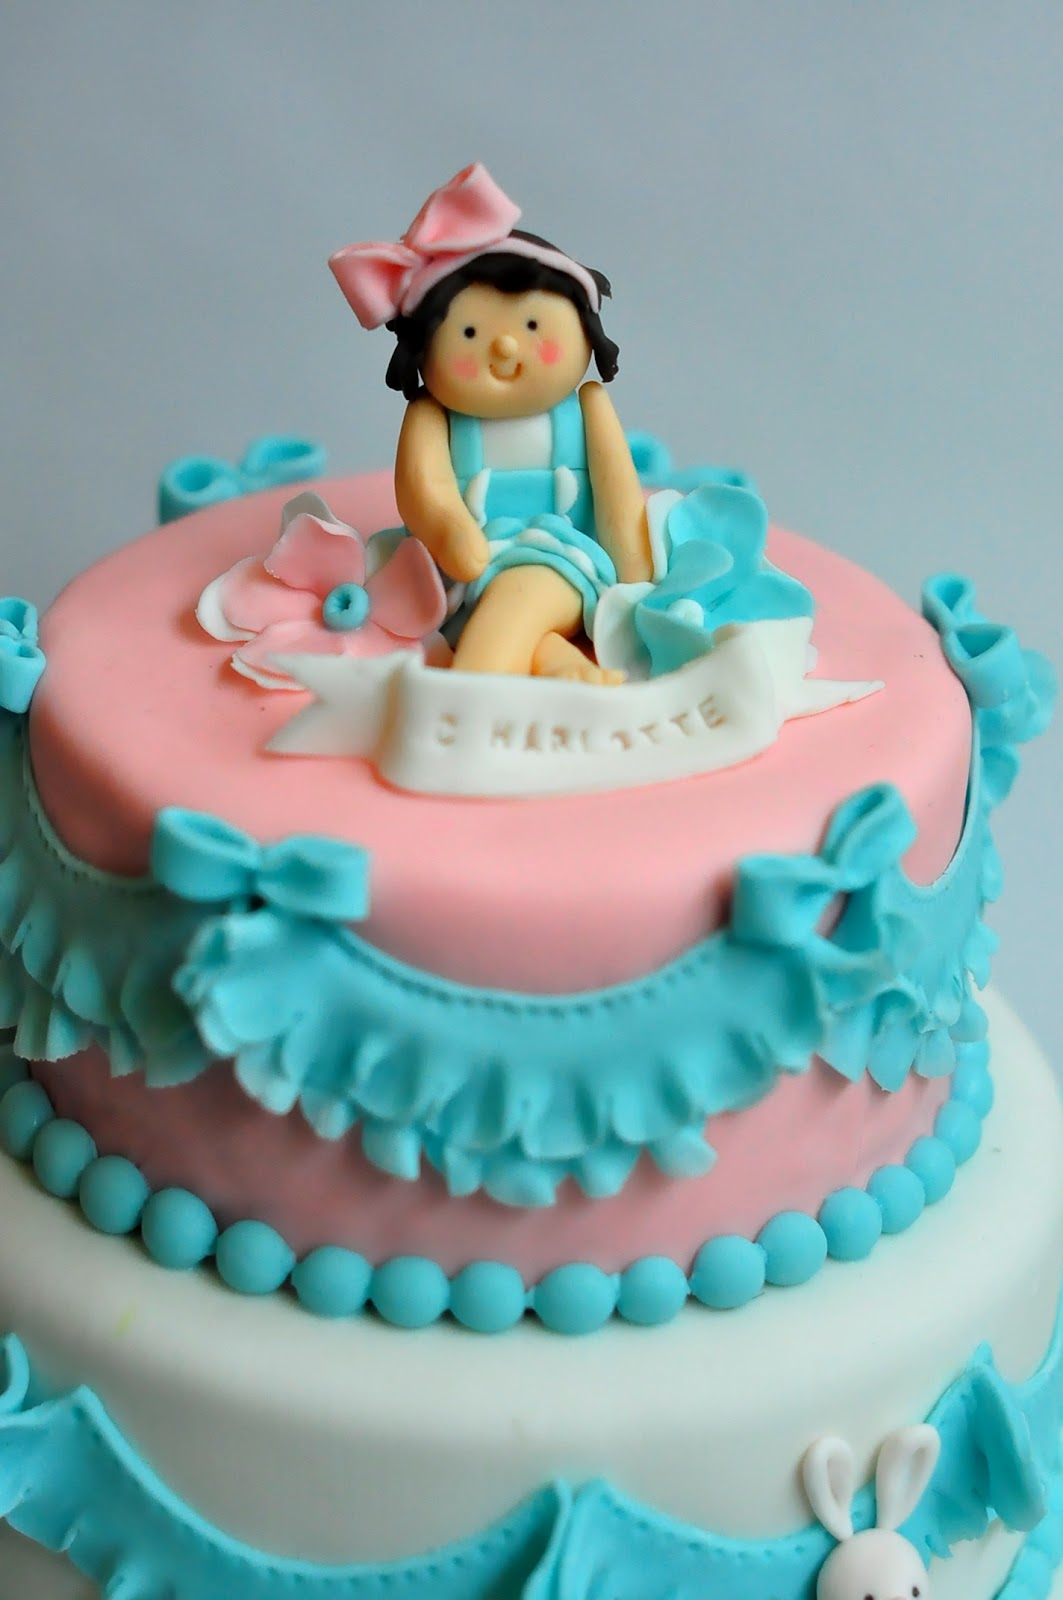 creamme bakeshoppe: pretty little girl tiered cake and ...